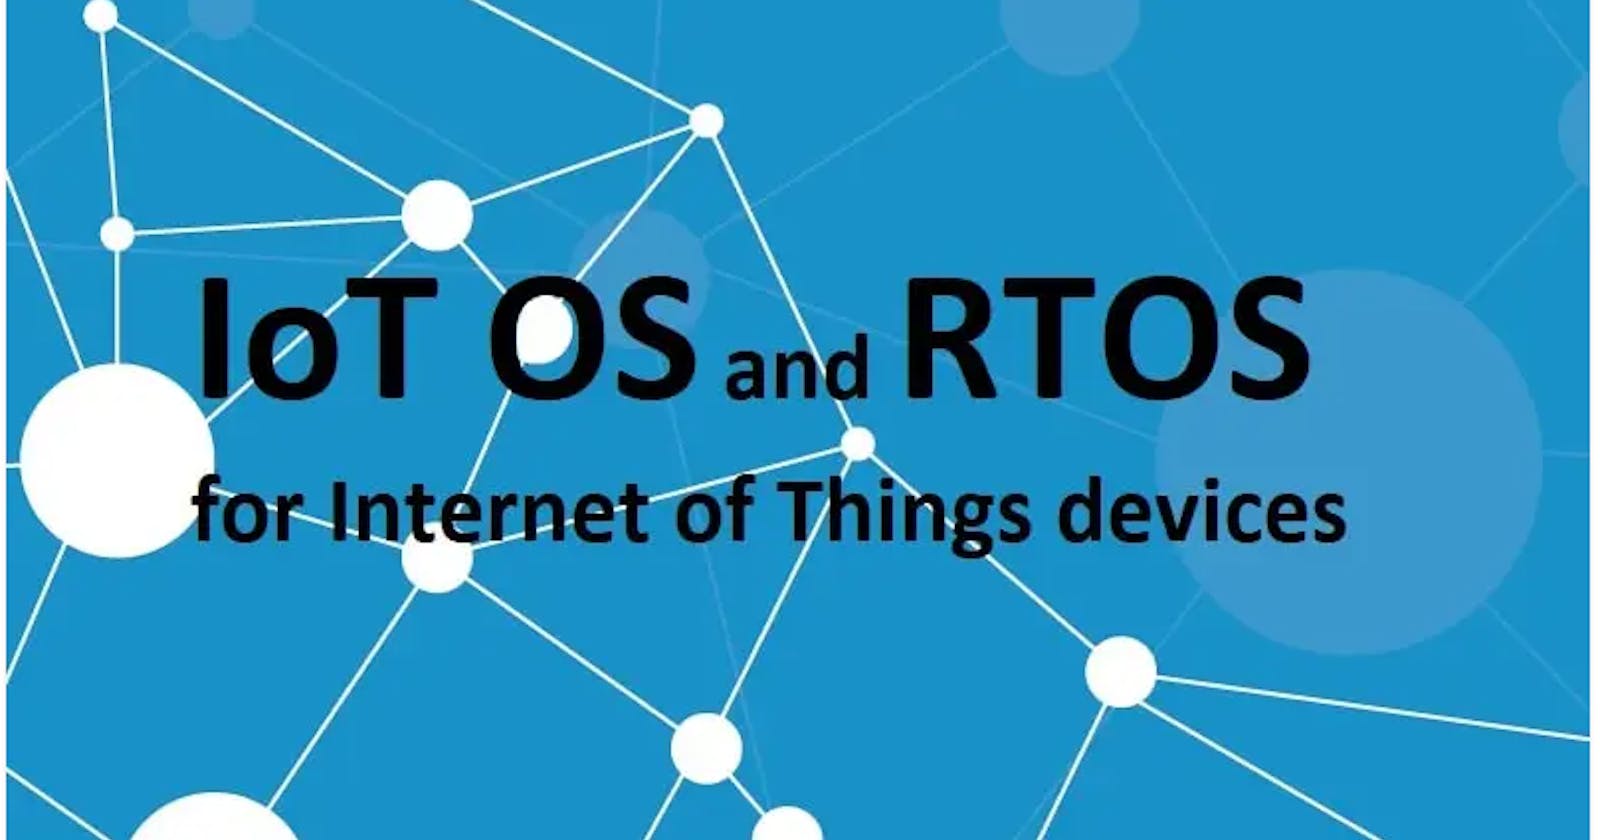 Embedded Systems 101: RTOS and IoT OS Demystified